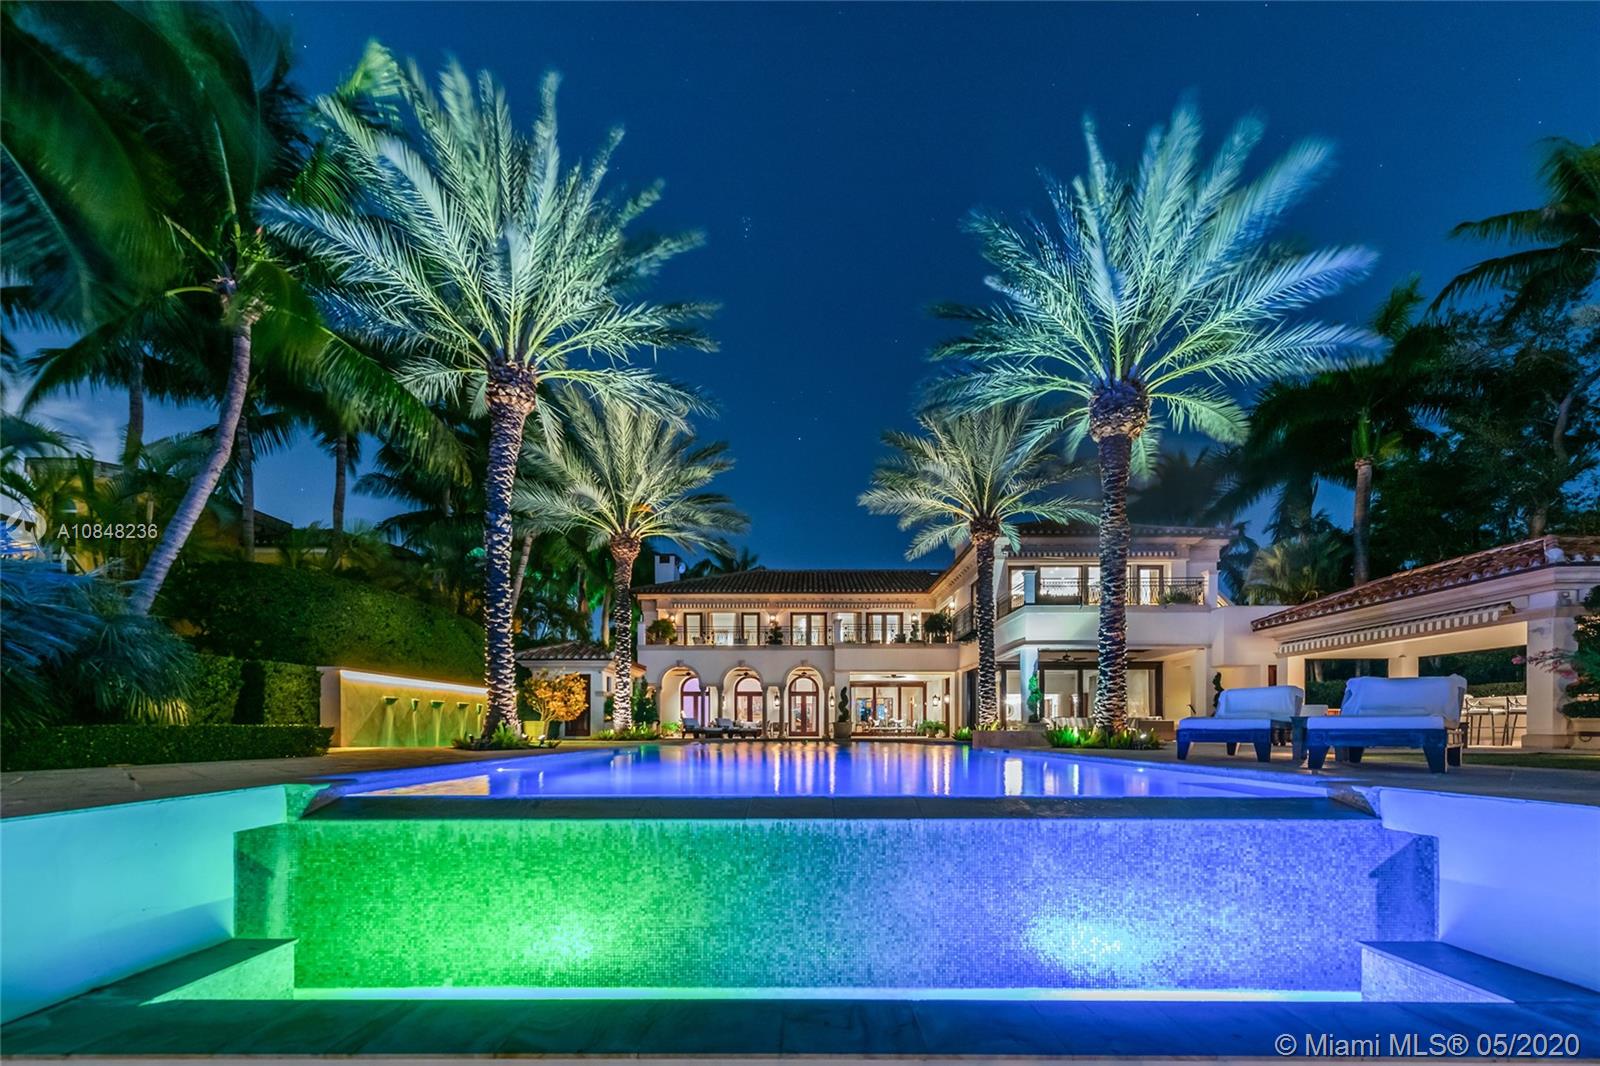 Miami And South Floridas Most Expensive Homes